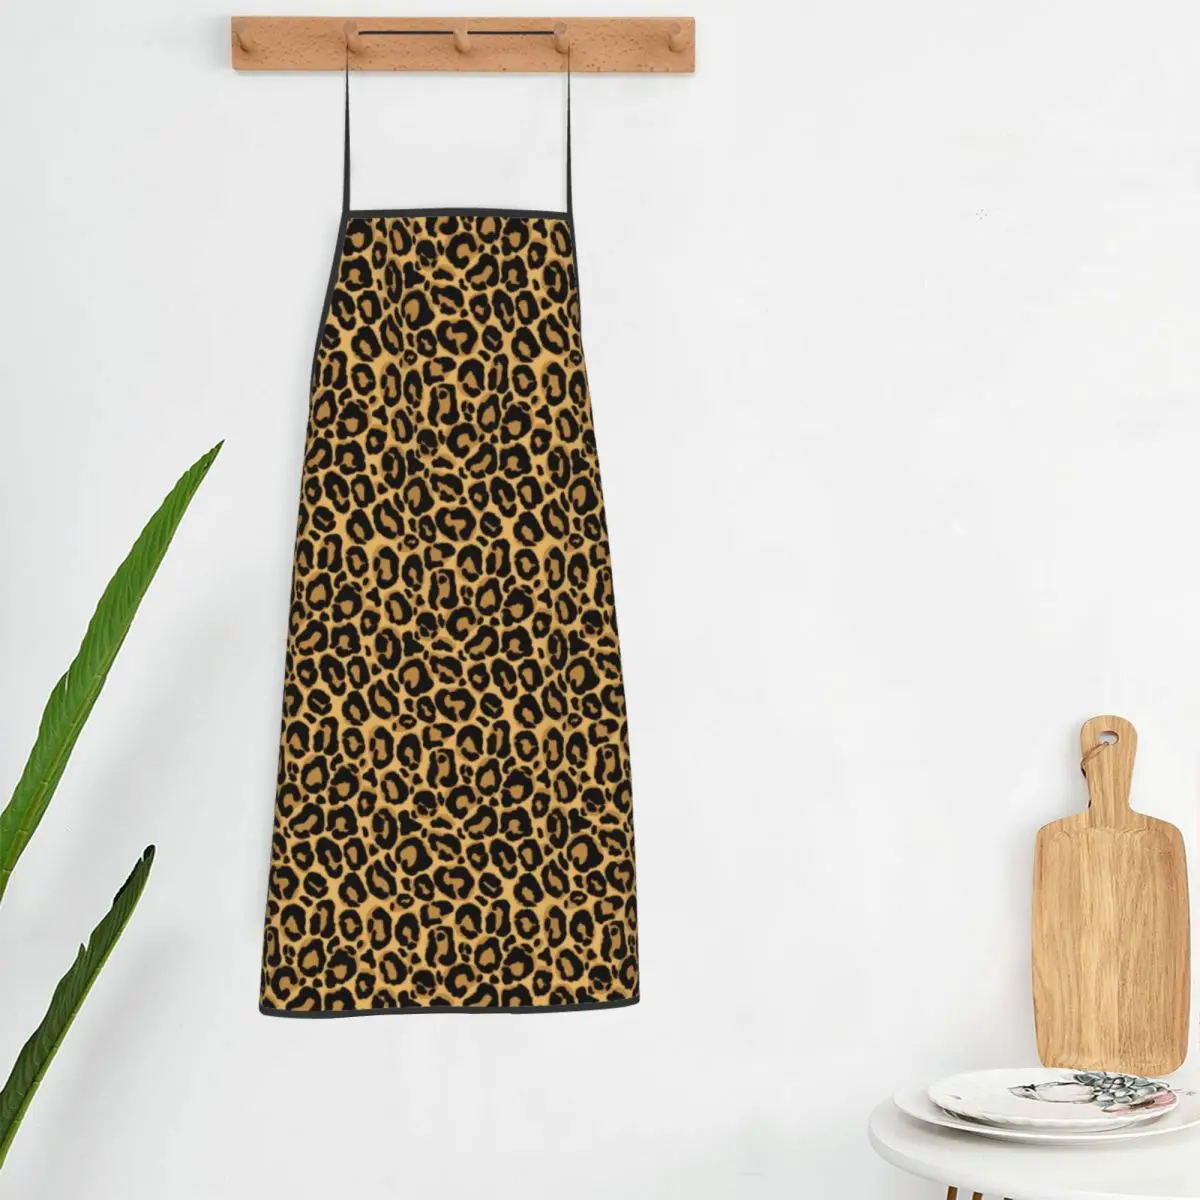 

Cheetah Brown Orange Apron Leopard Pattern Animal Print Cleaning Kitchen Accessories Barbecue Barber Aprons without Pocket